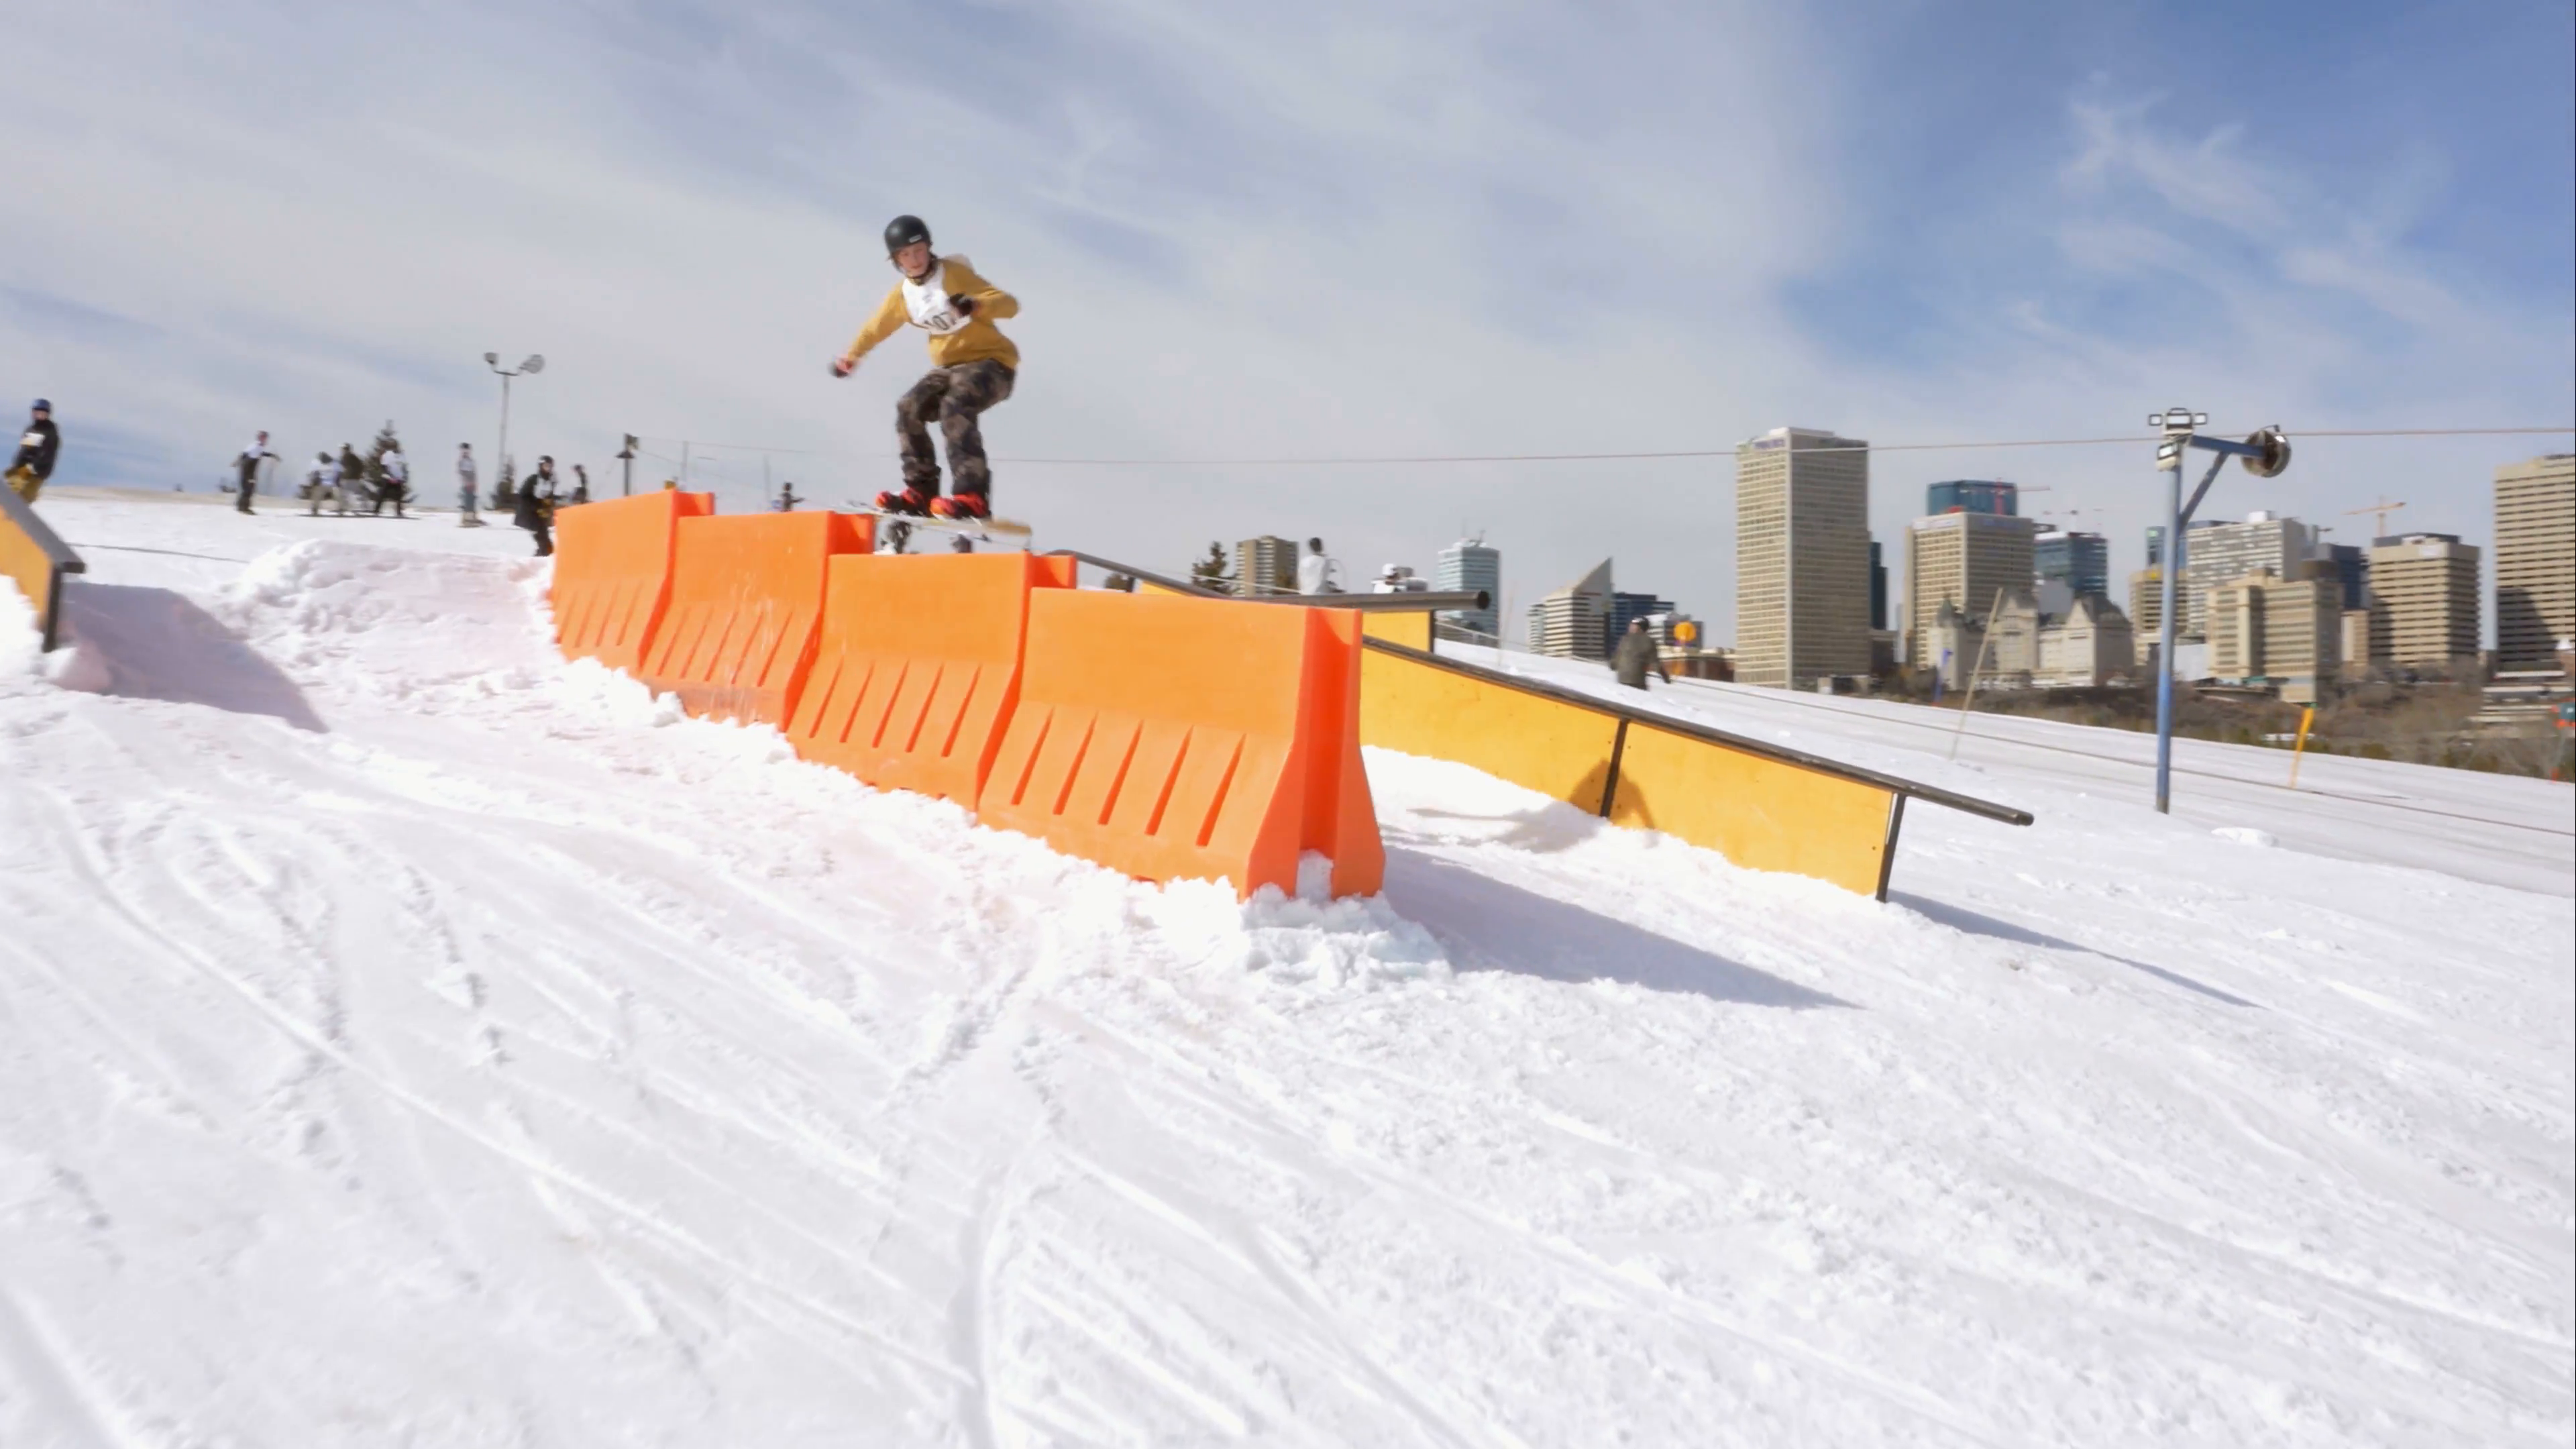 Snowboarder performs board slide to 180 on obstacle course steps ...